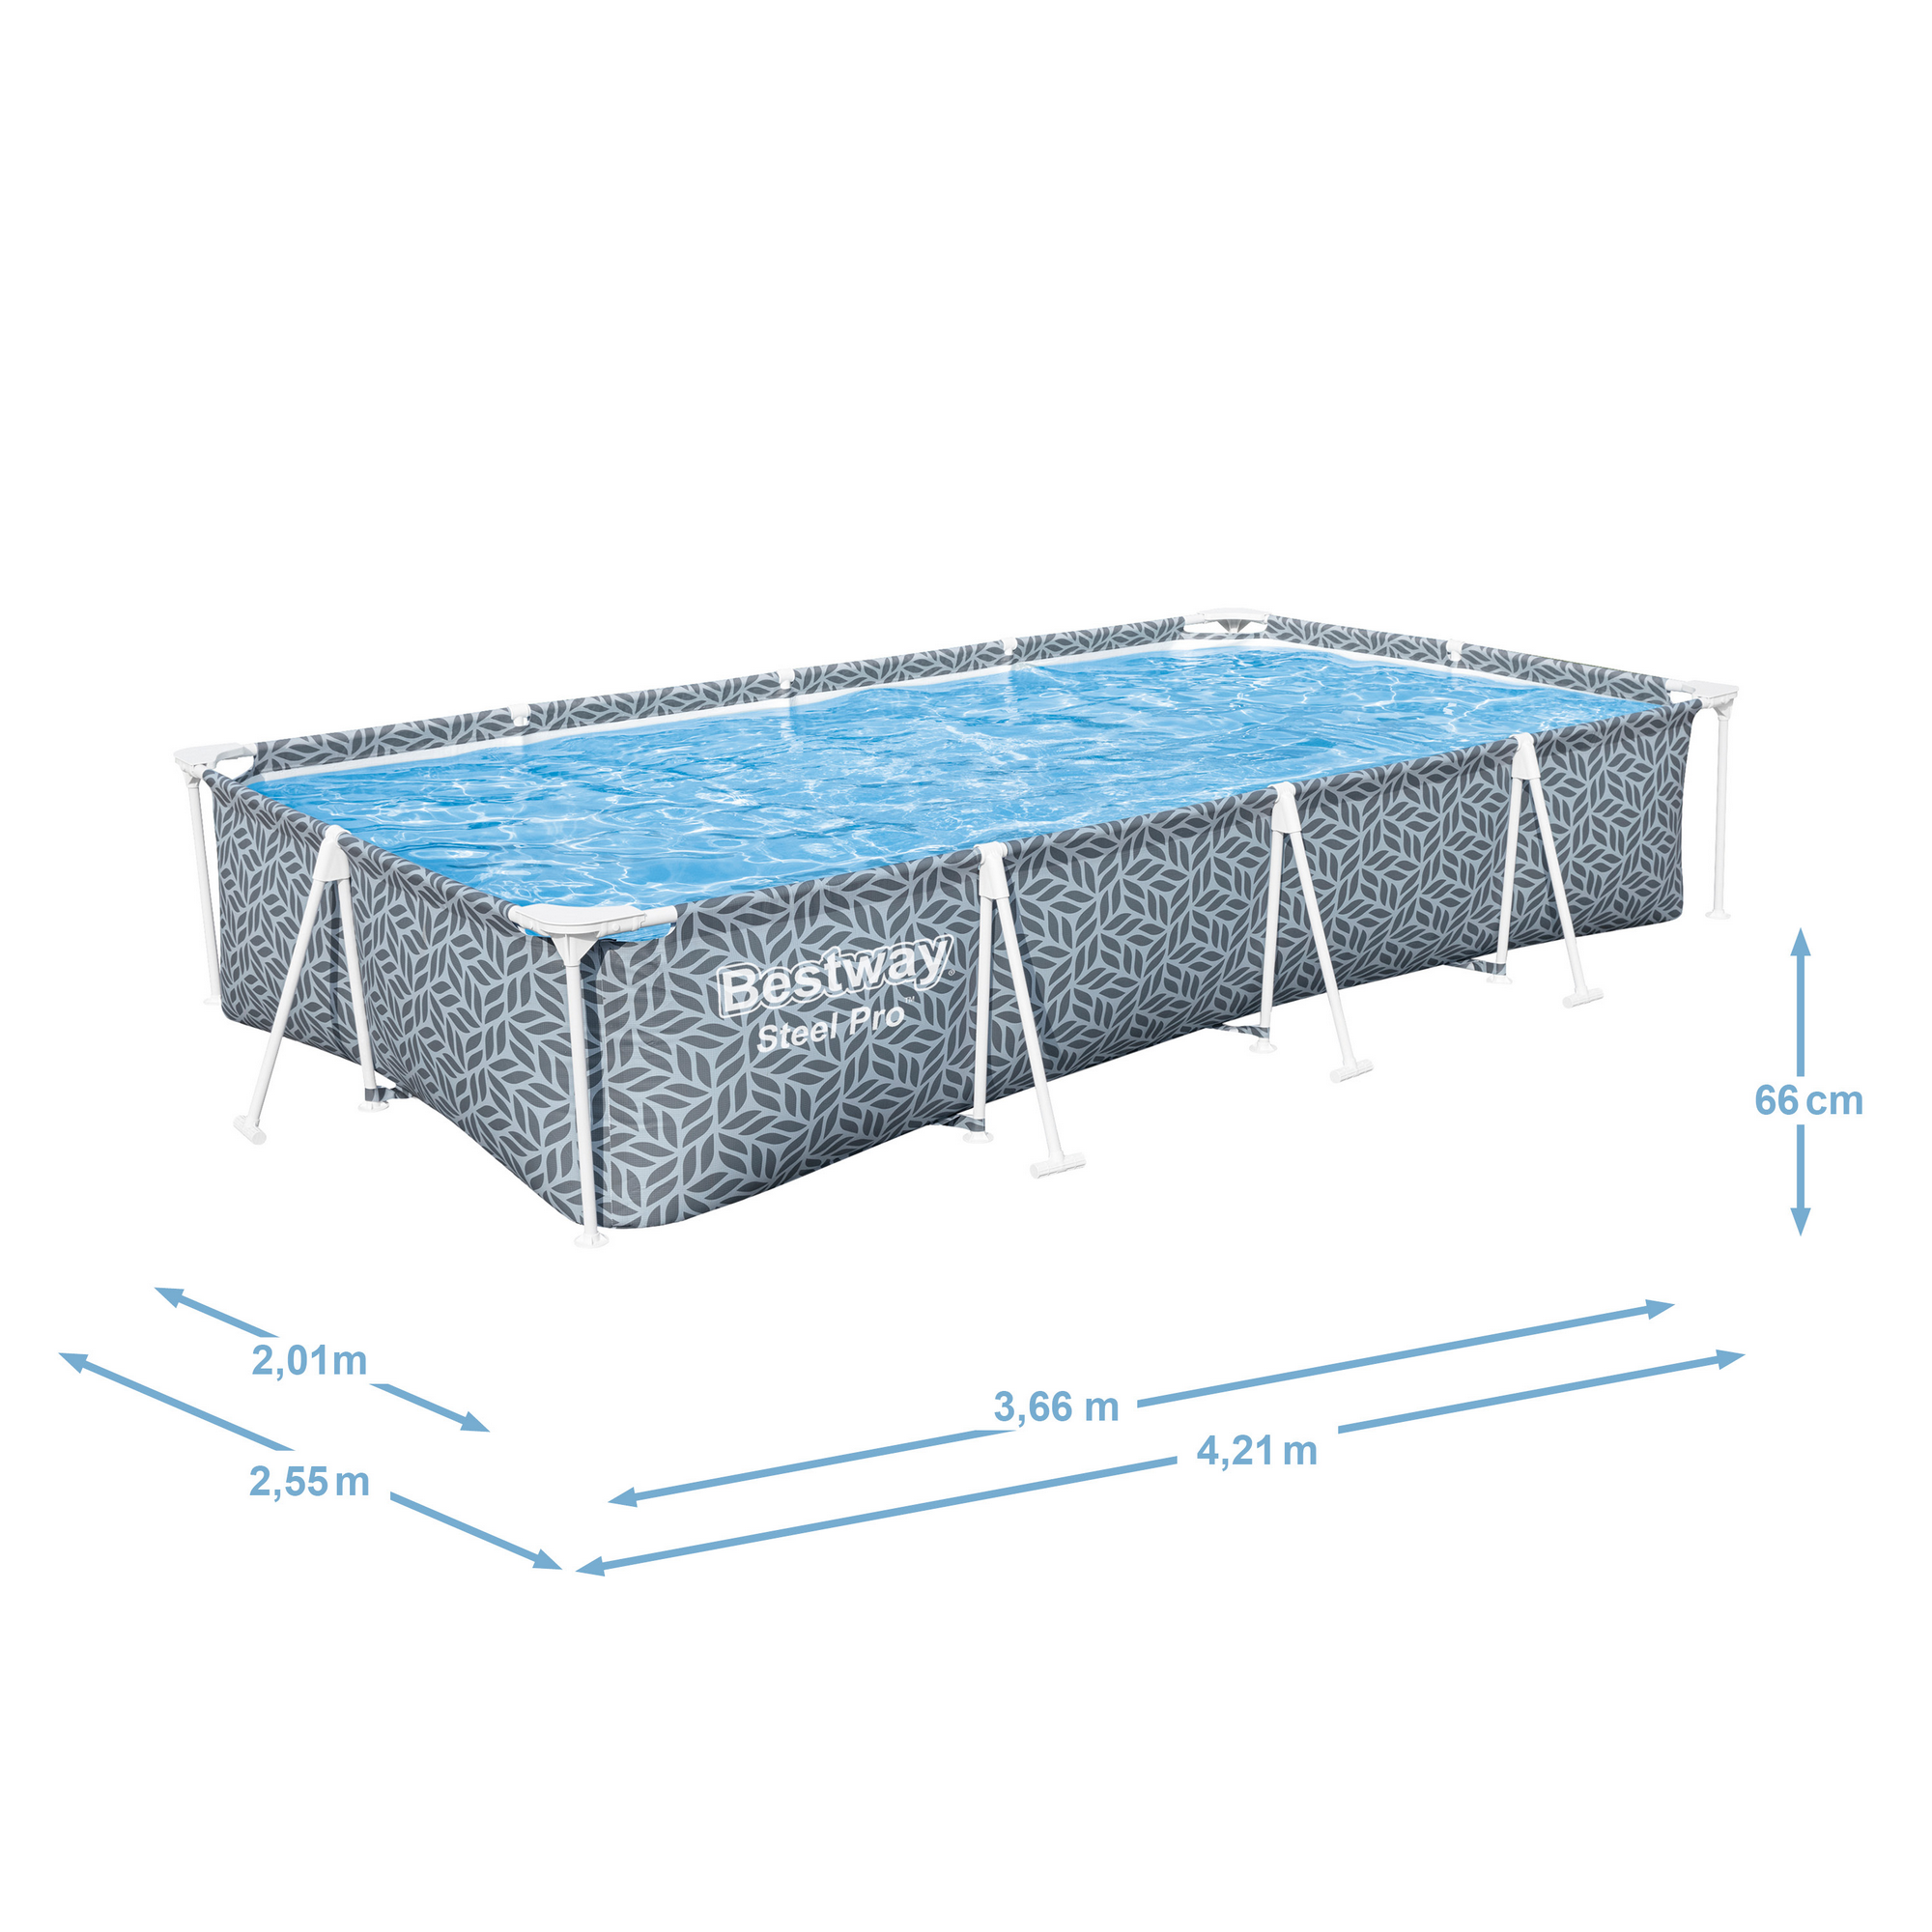 Frame-Pool 'Steel Pro' 366 x 201 x 66 cm + product picture